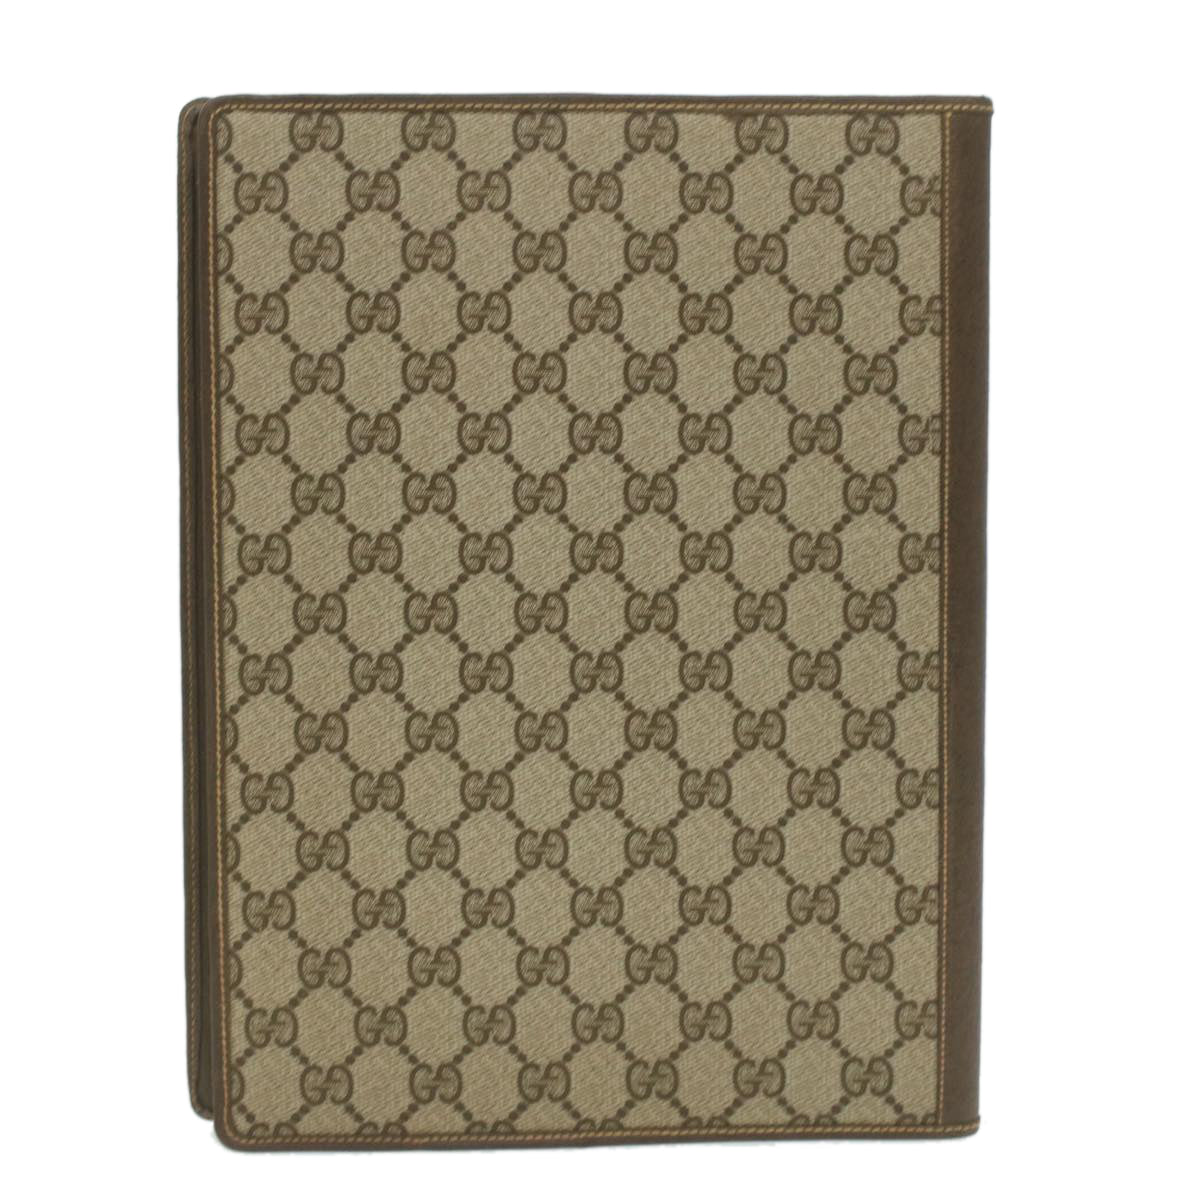 GUCCI GG Canvas Day Planner Cover PVC Leather Beige Auth am3940